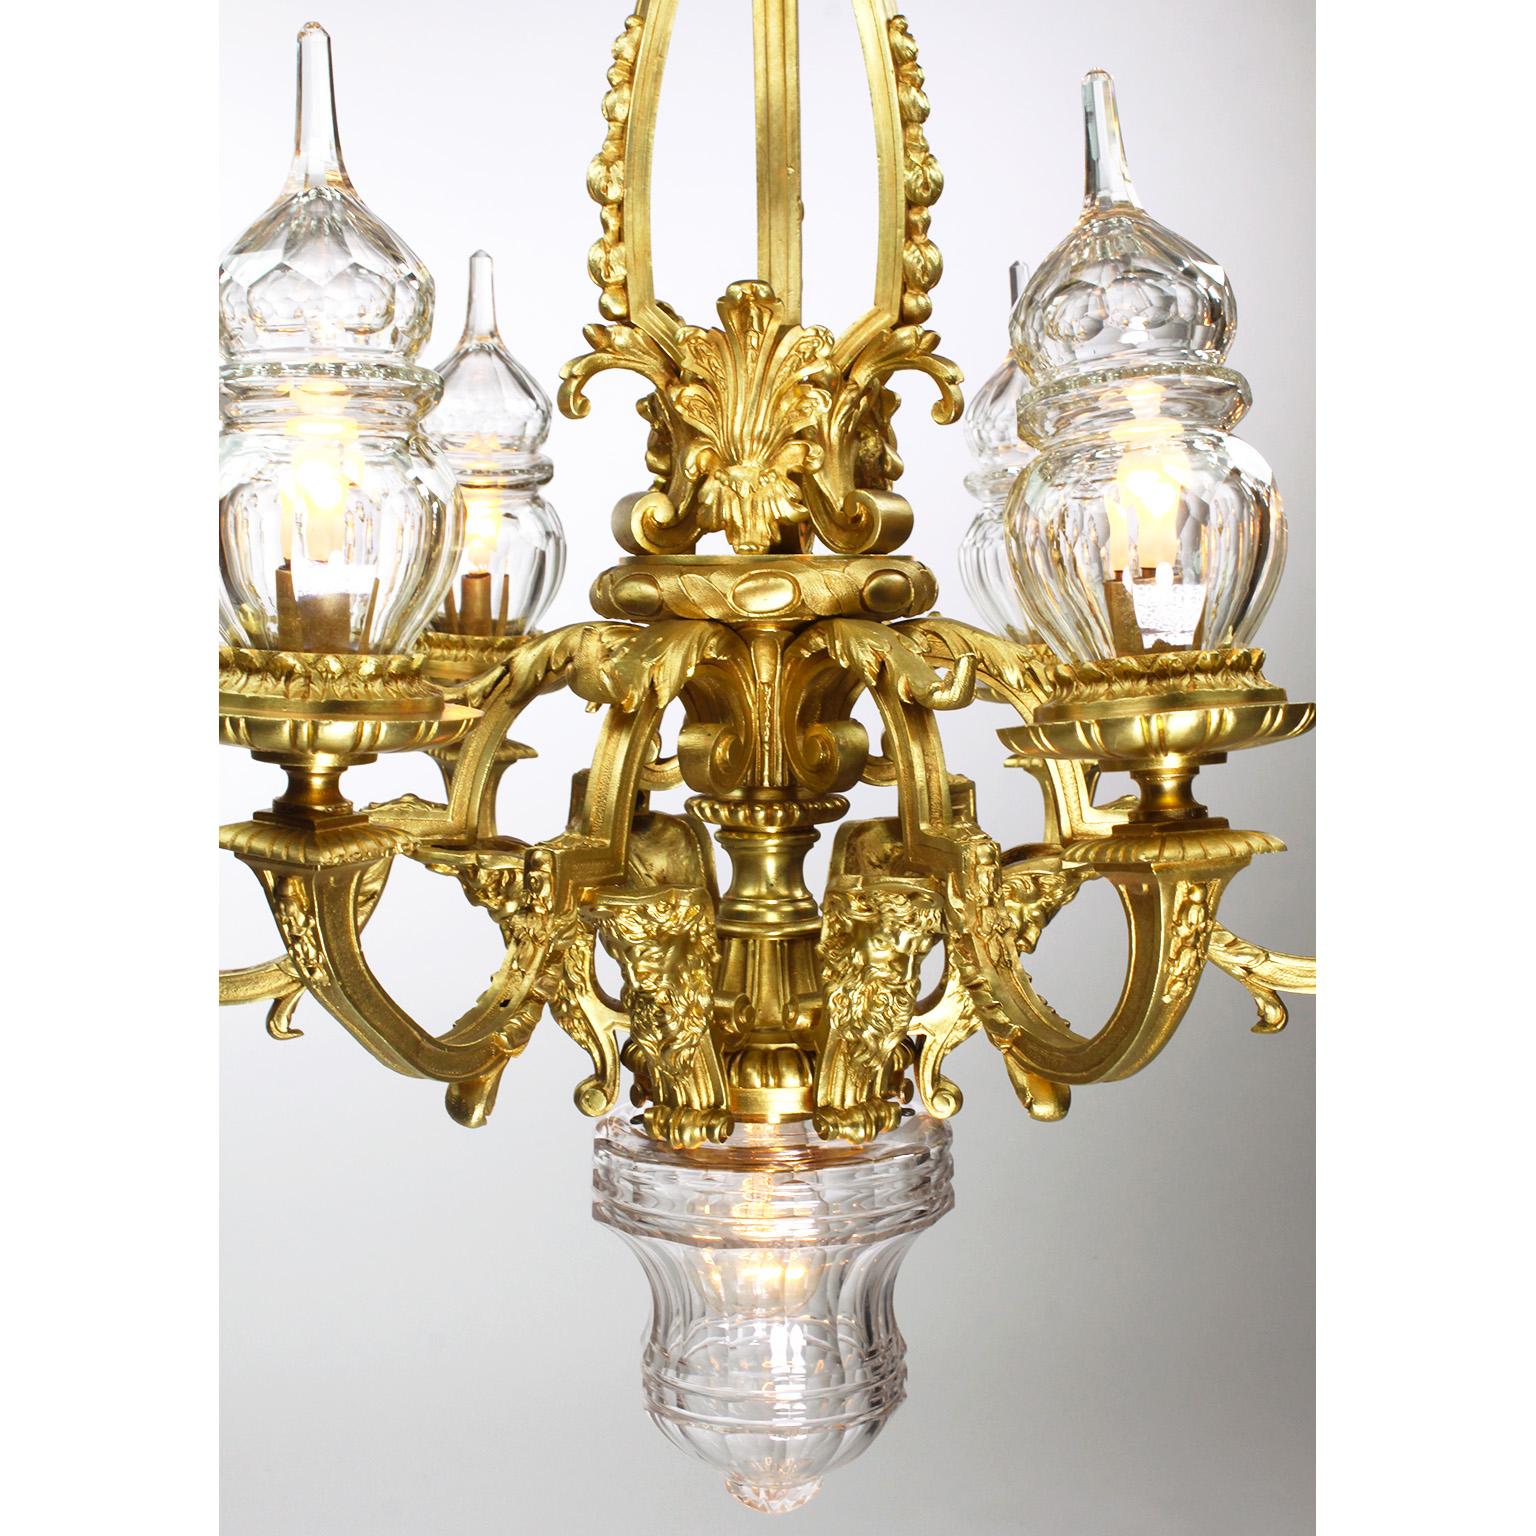 French Louis XVI Style Gilt-Bronze & Blown Cut-Glass 7-Light Figural Chandelier In Good Condition For Sale In Los Angeles, CA